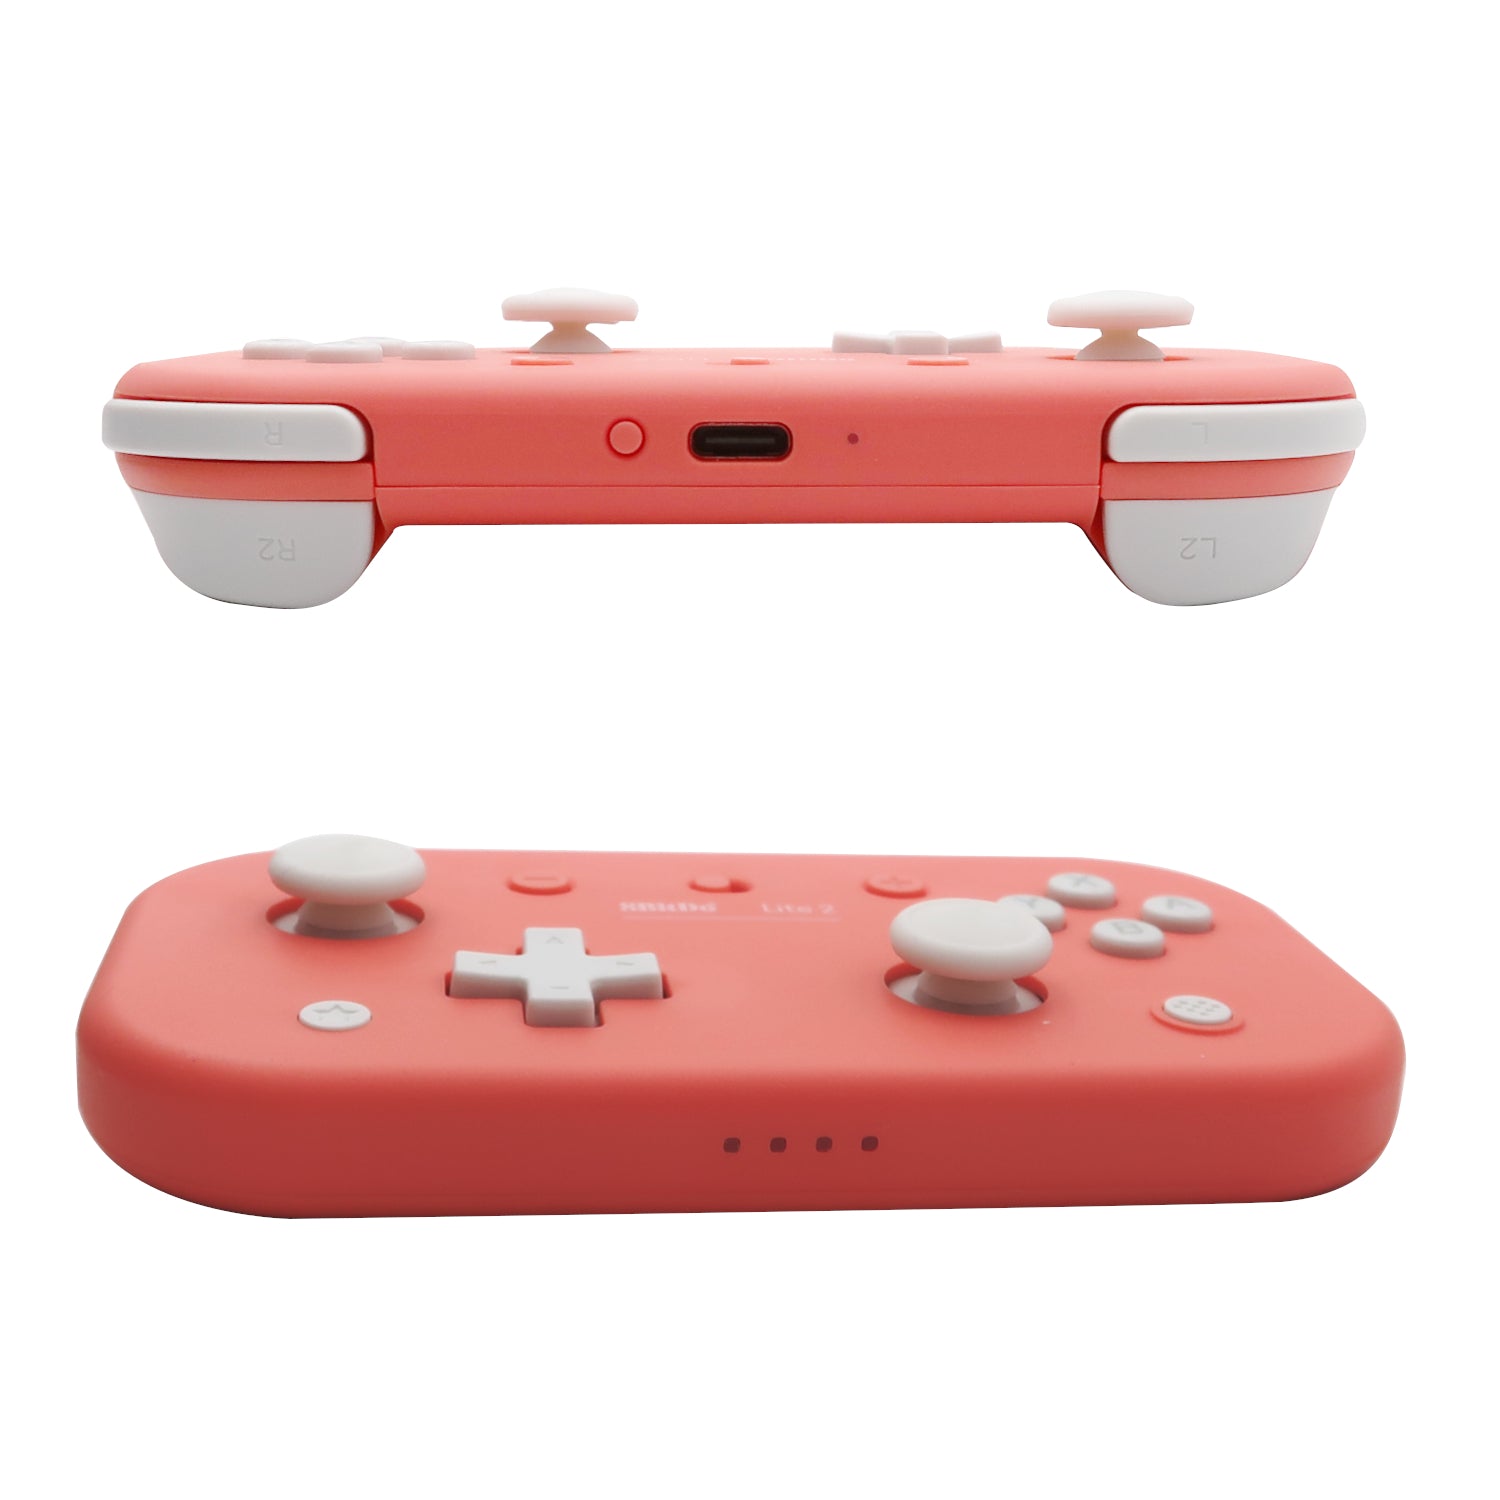  8Bitdo Lite 2 Bluetooth Gamepad for Switch, Switch Lite,  Android and Raspberry Pi (Turquoise) : Everything Else